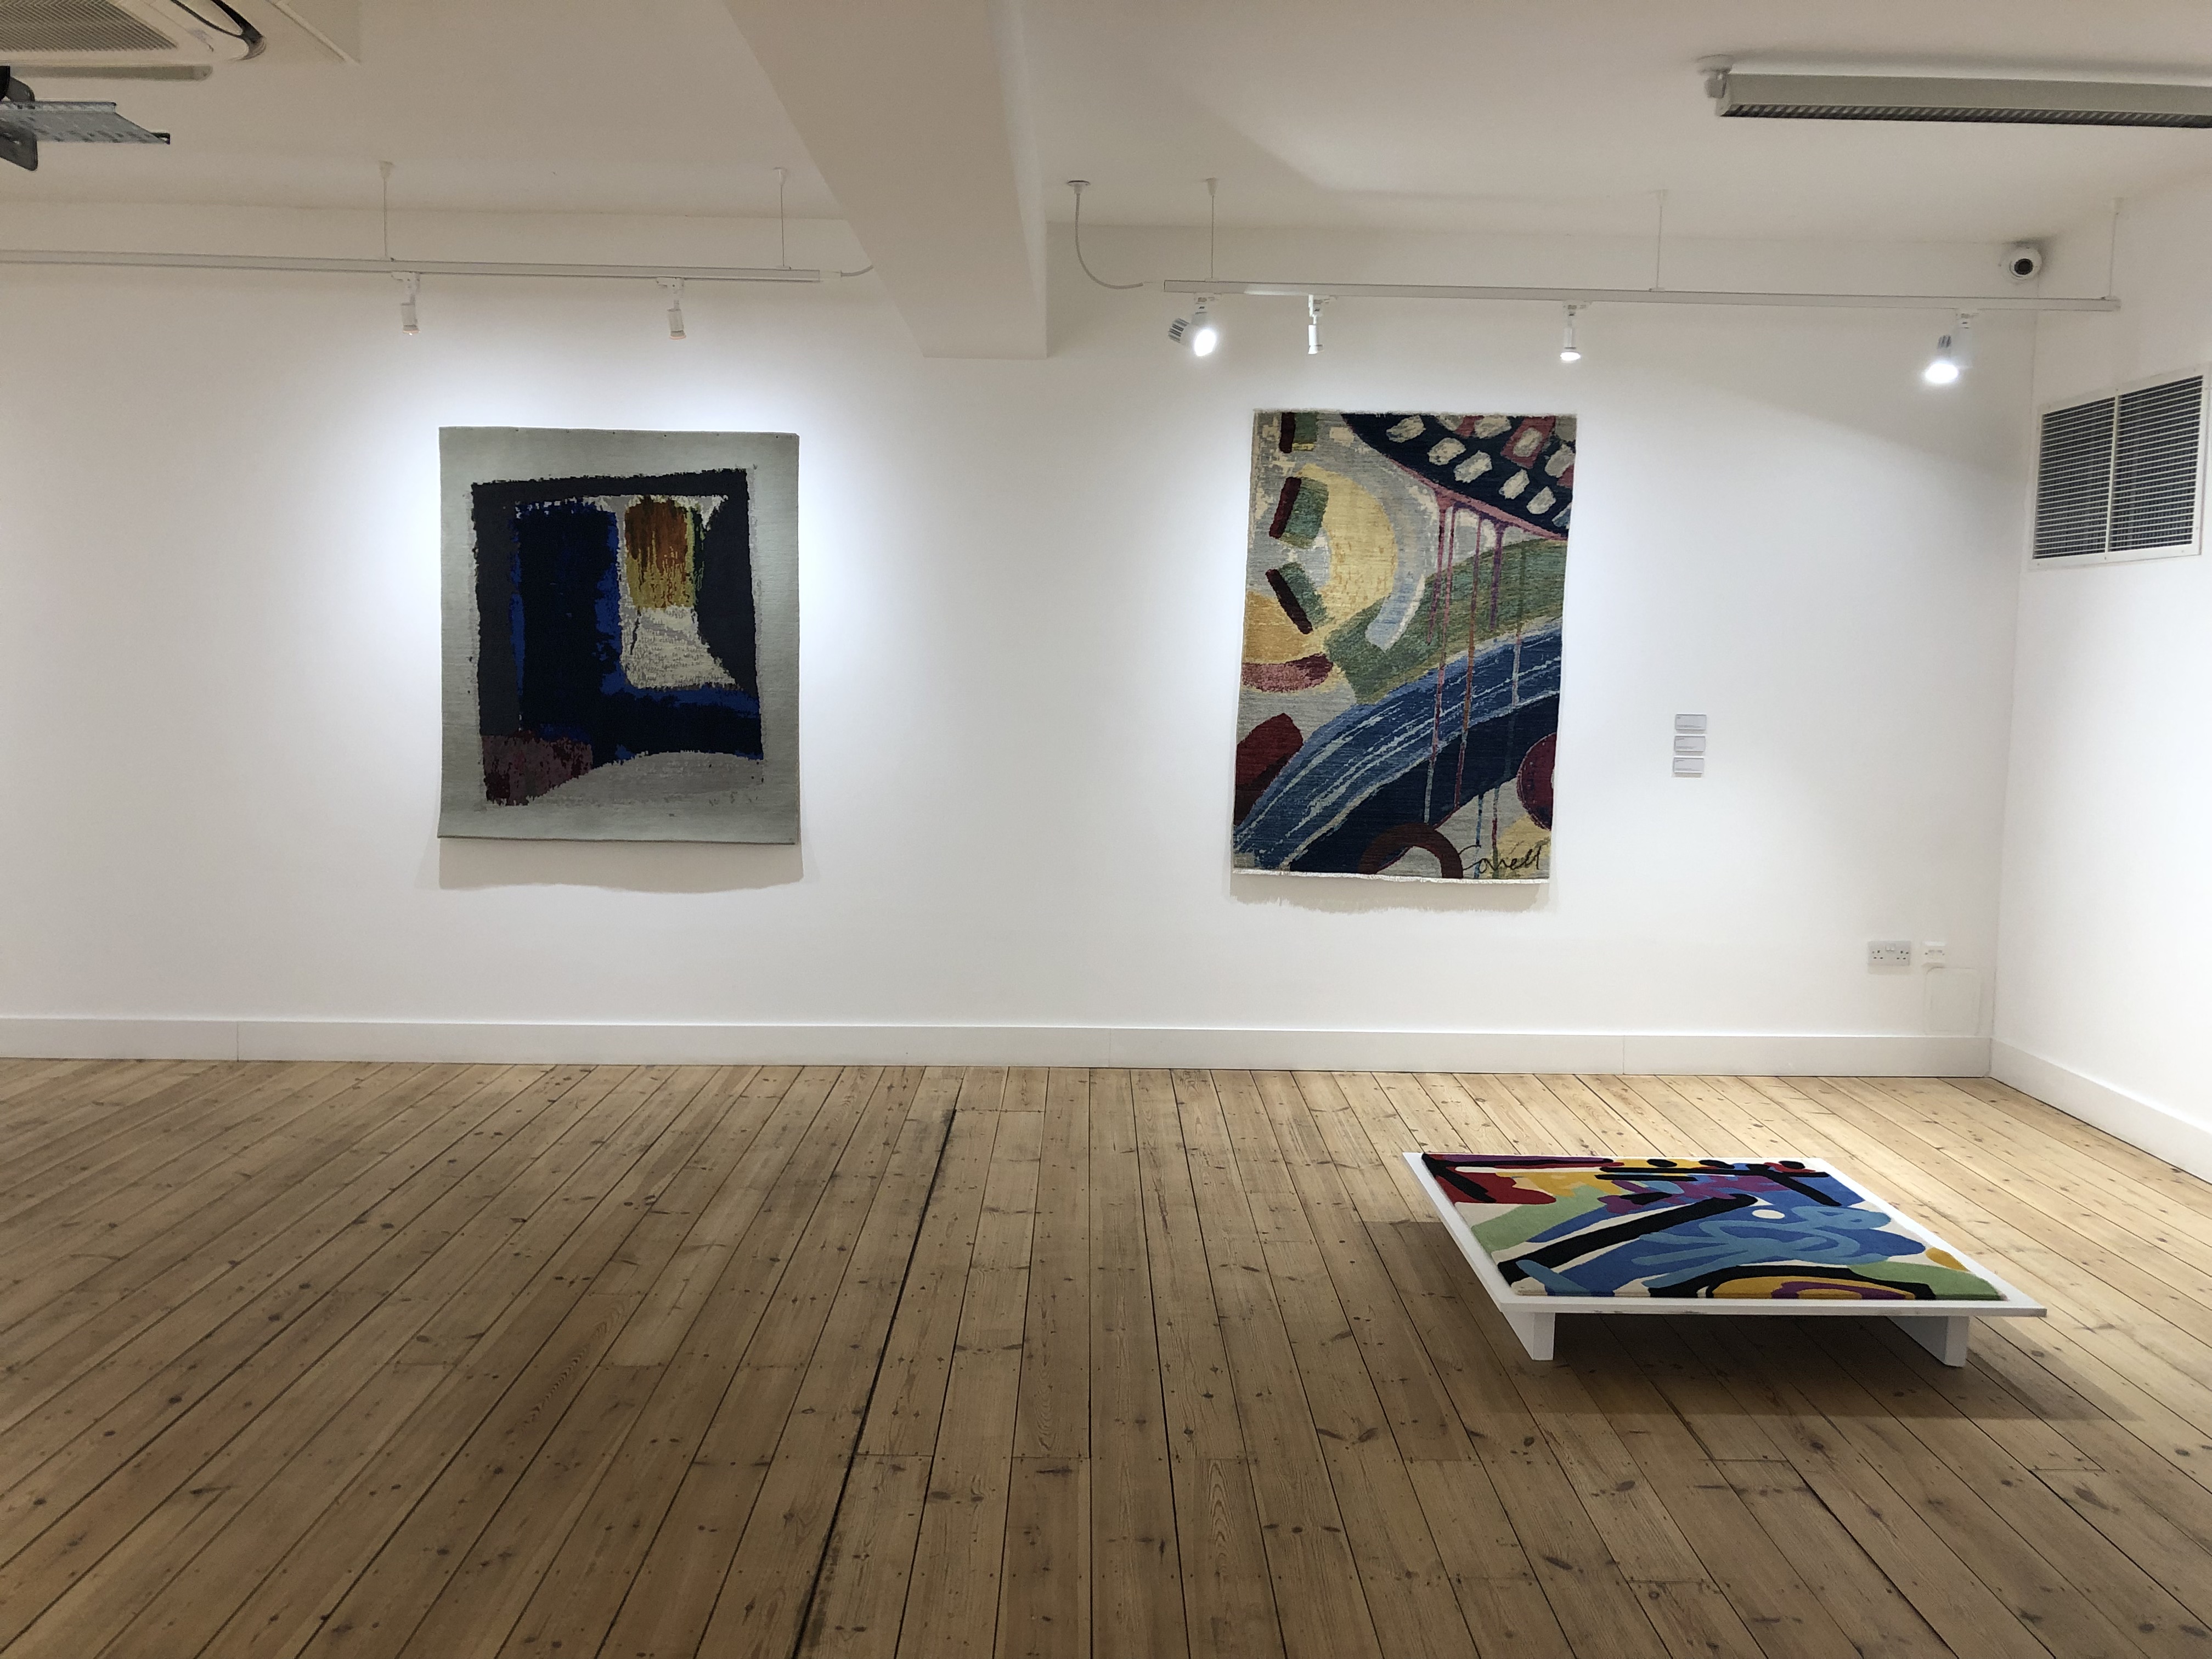 Canvas to Carpet exhibition space - Allistair Covell 